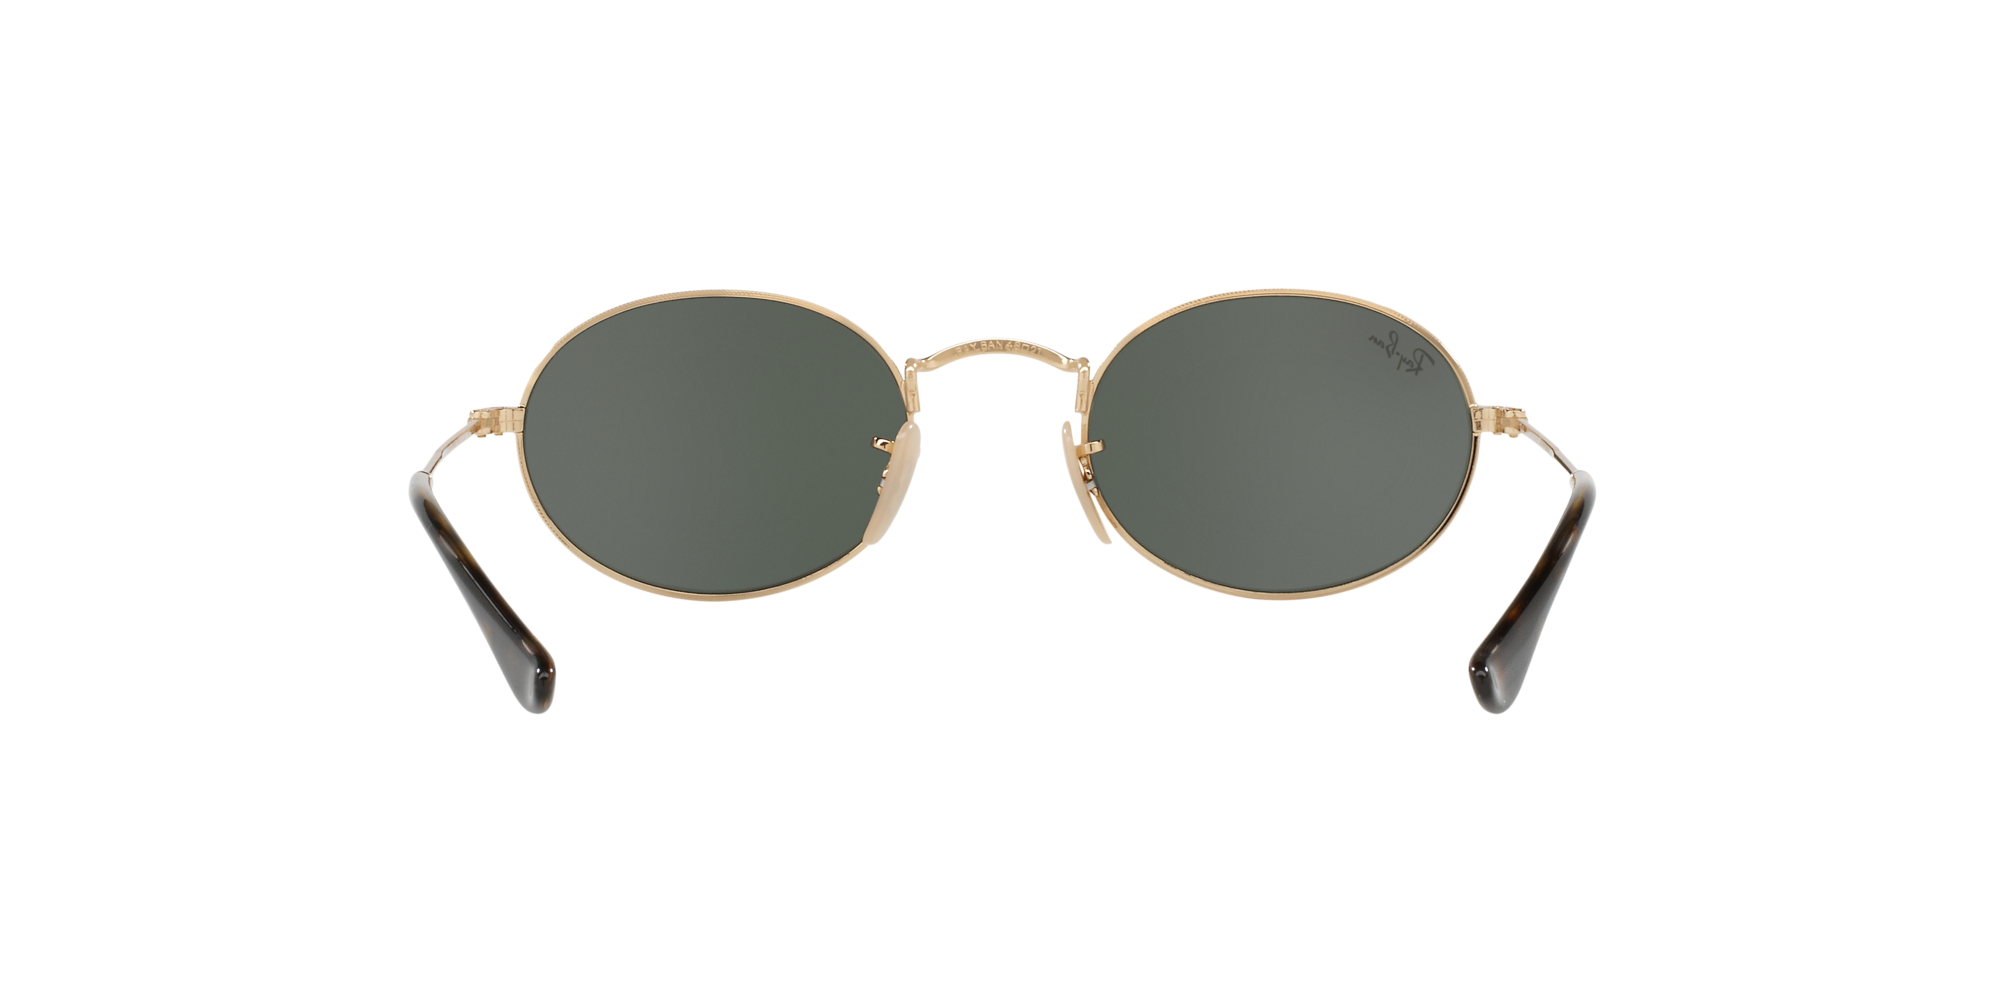 RAY-BAN OVAL RB 3547N 001, , hi-res image number 2